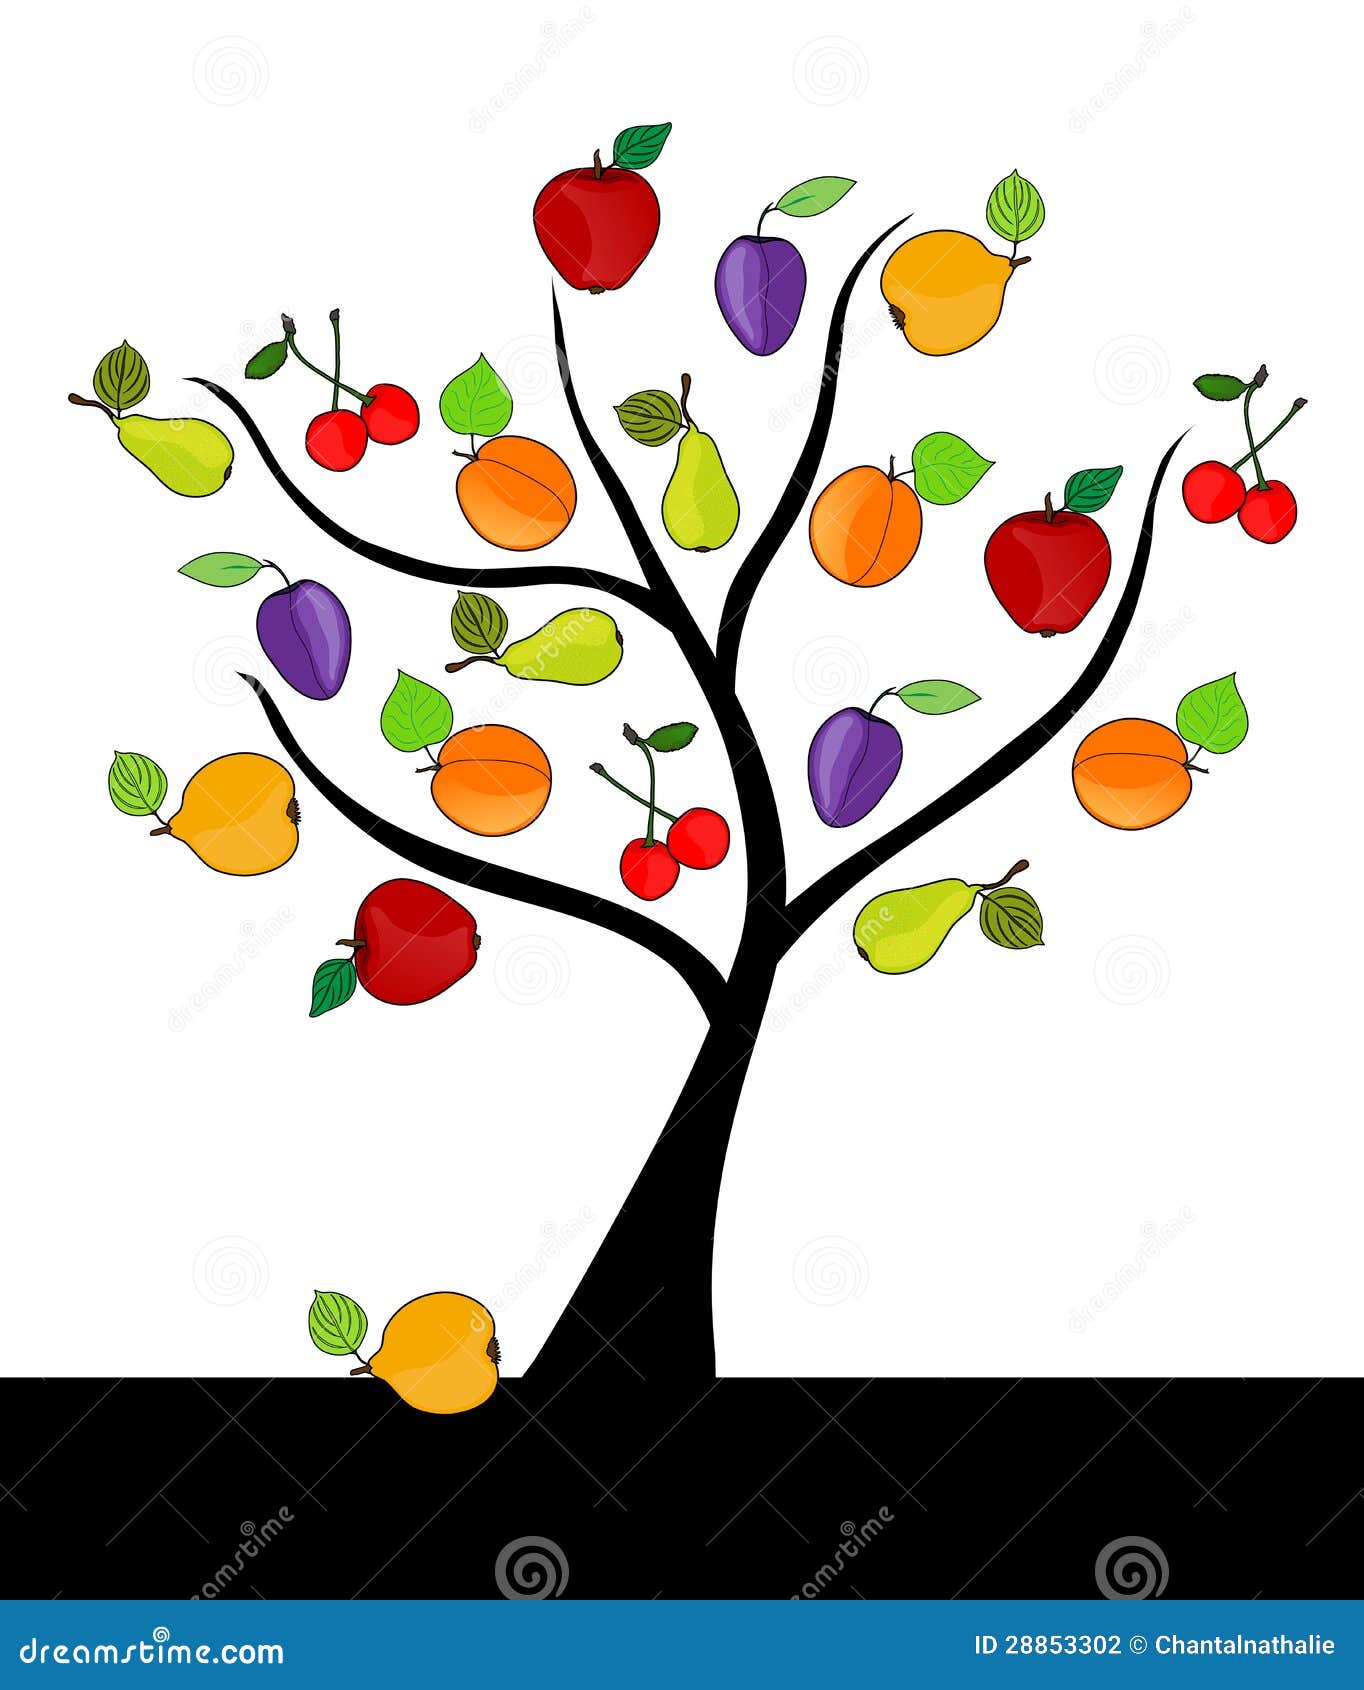 free clipart of fruit trees - photo #46